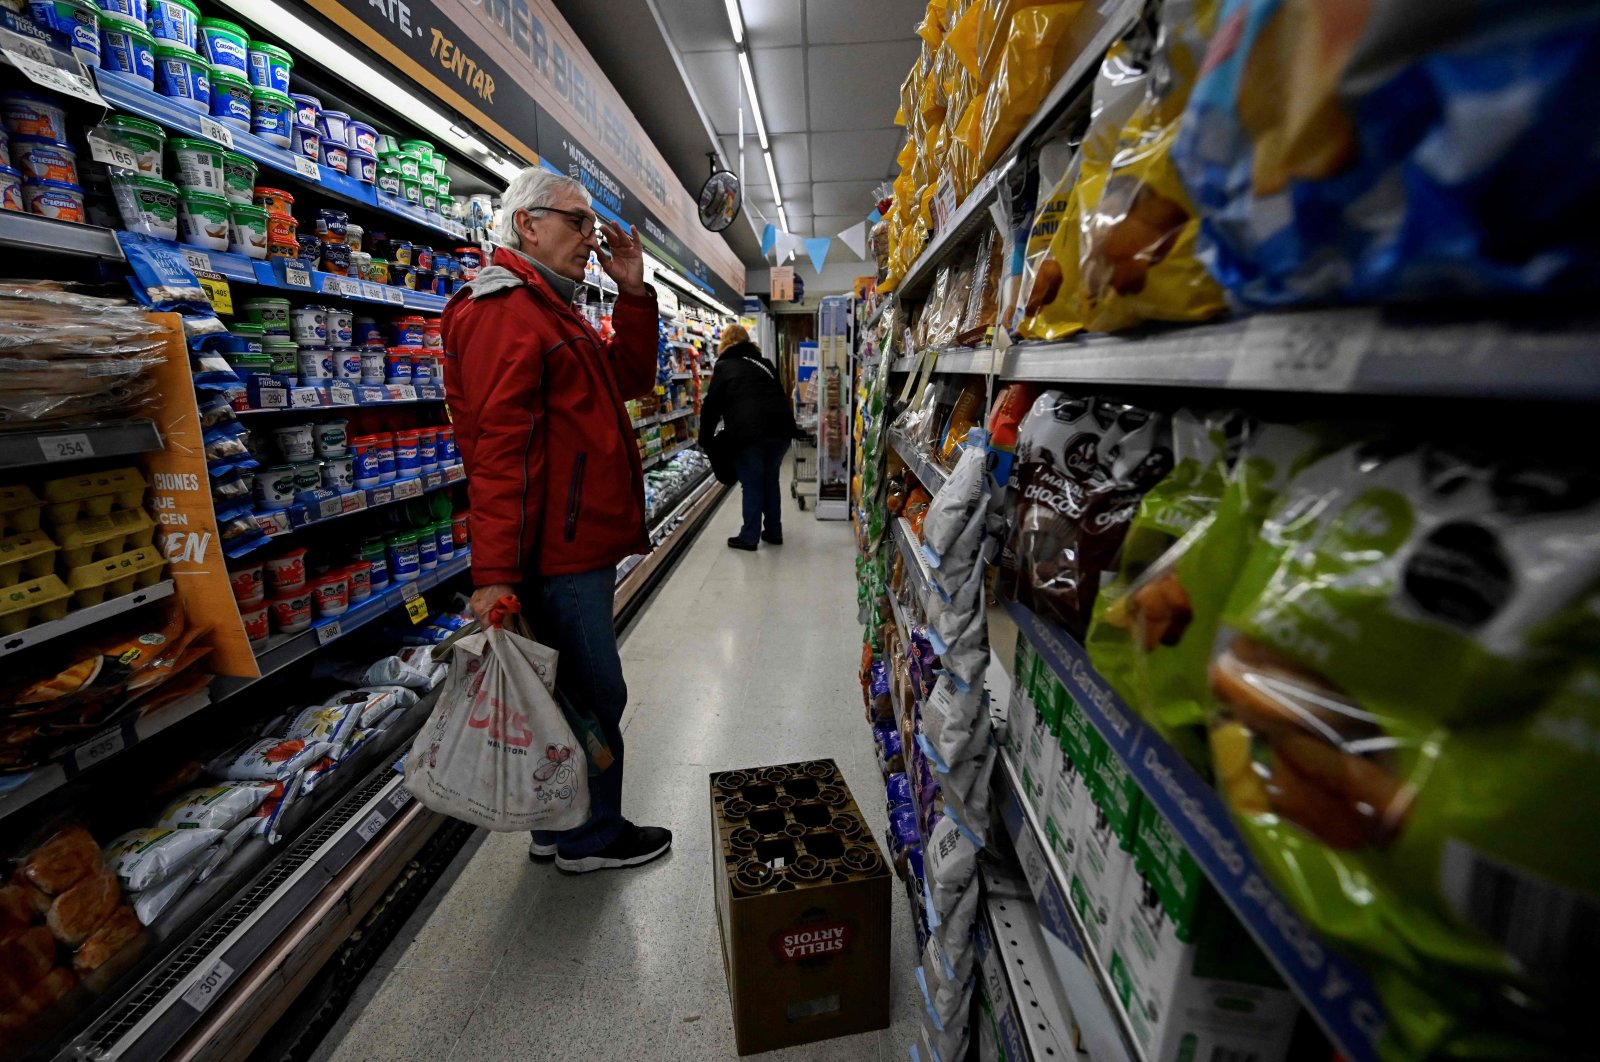 Adrian Alvarez, 63, instructor of transcendental meditation, checks prices at the supermarket in Buenos Aires on June 12, 2023. (Photo by Luis ROBAYO / AFP)